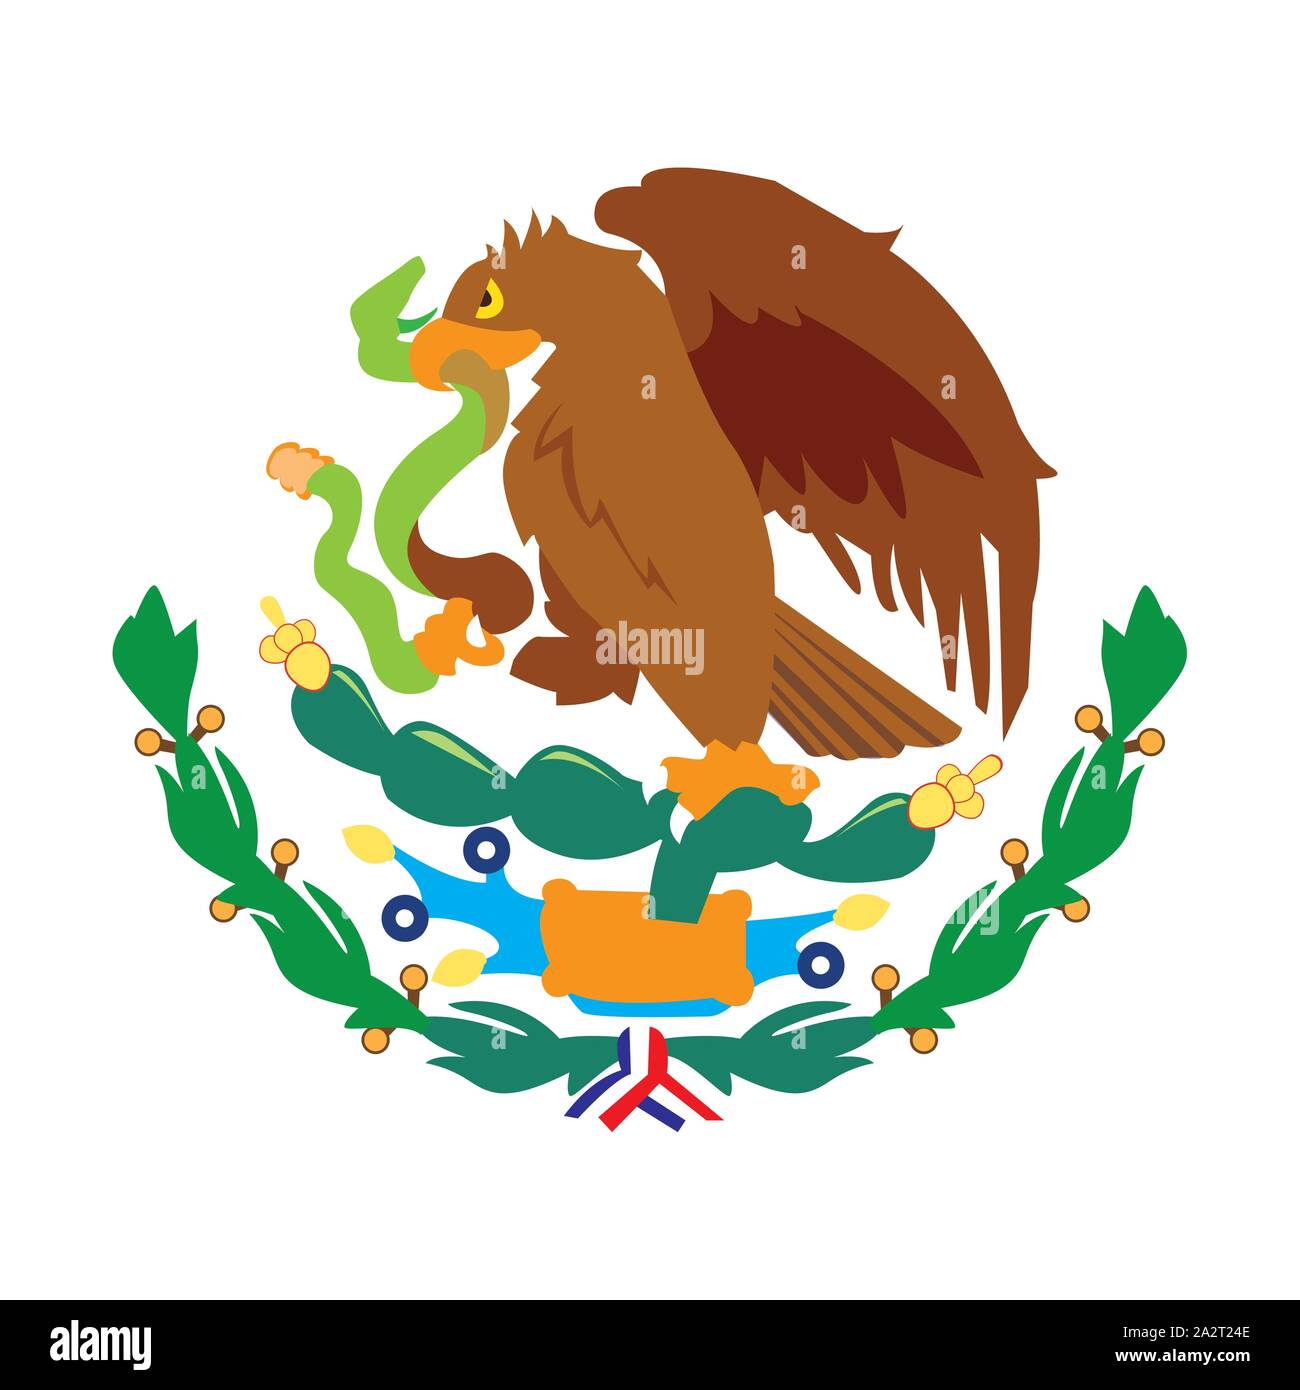 Mexican Eagle High Resolution Stock Photography And Images Alamy Draw something at the bald eagle's feet, like a rock, a ledge or even a flag, just so it doesn't appear to be floating. https www alamy com mexican eagle design mexico culture tourism landmark latin and party theme vector illustration image328754846 html